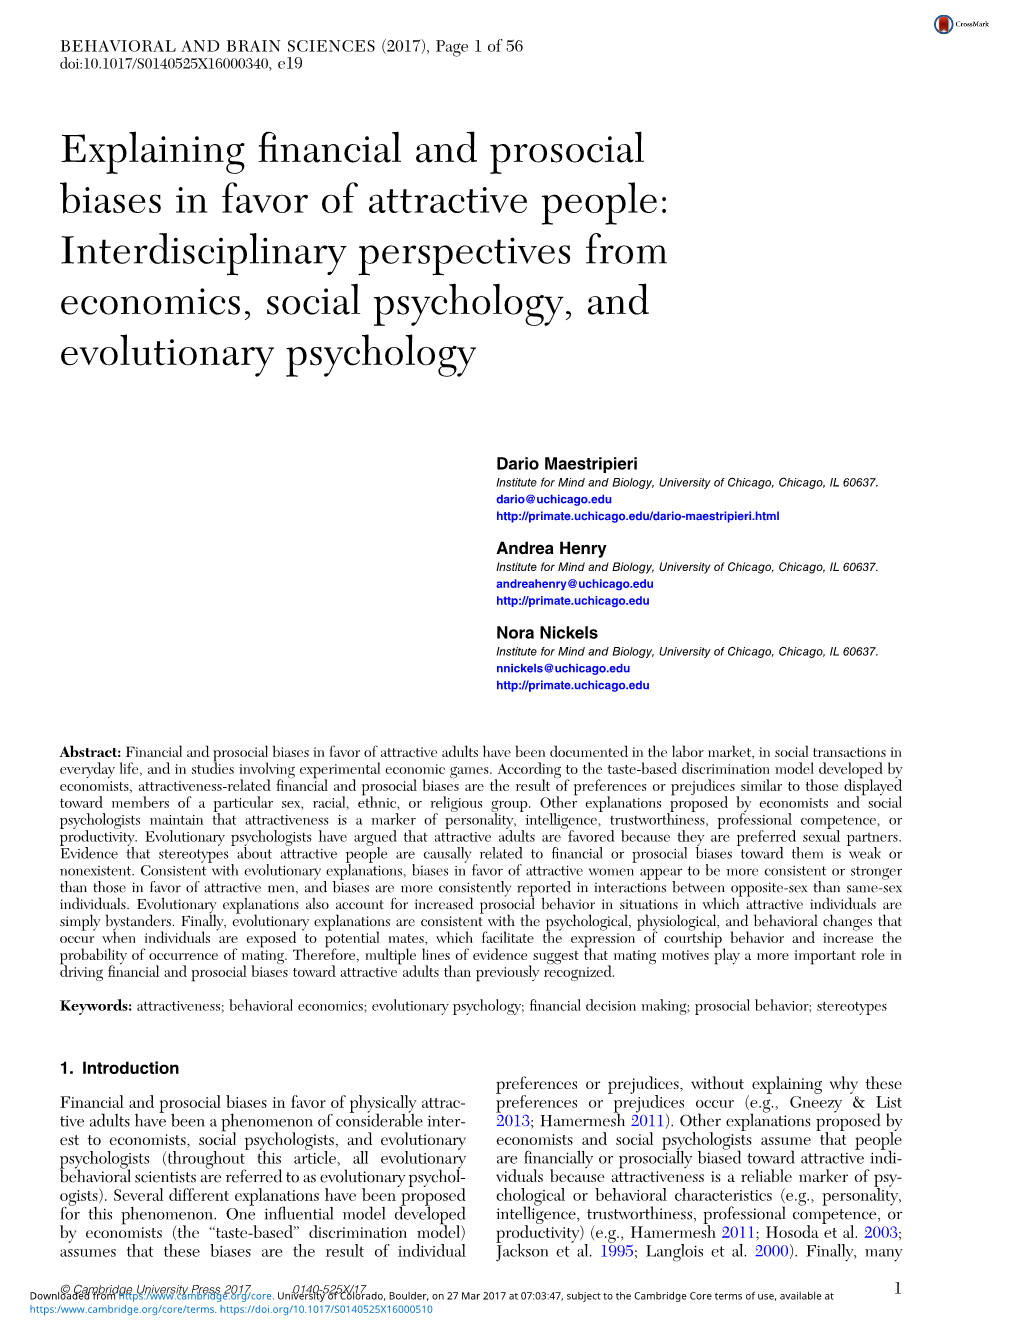 Explaining Financial and Prosocial Biases in Favor of Attractive